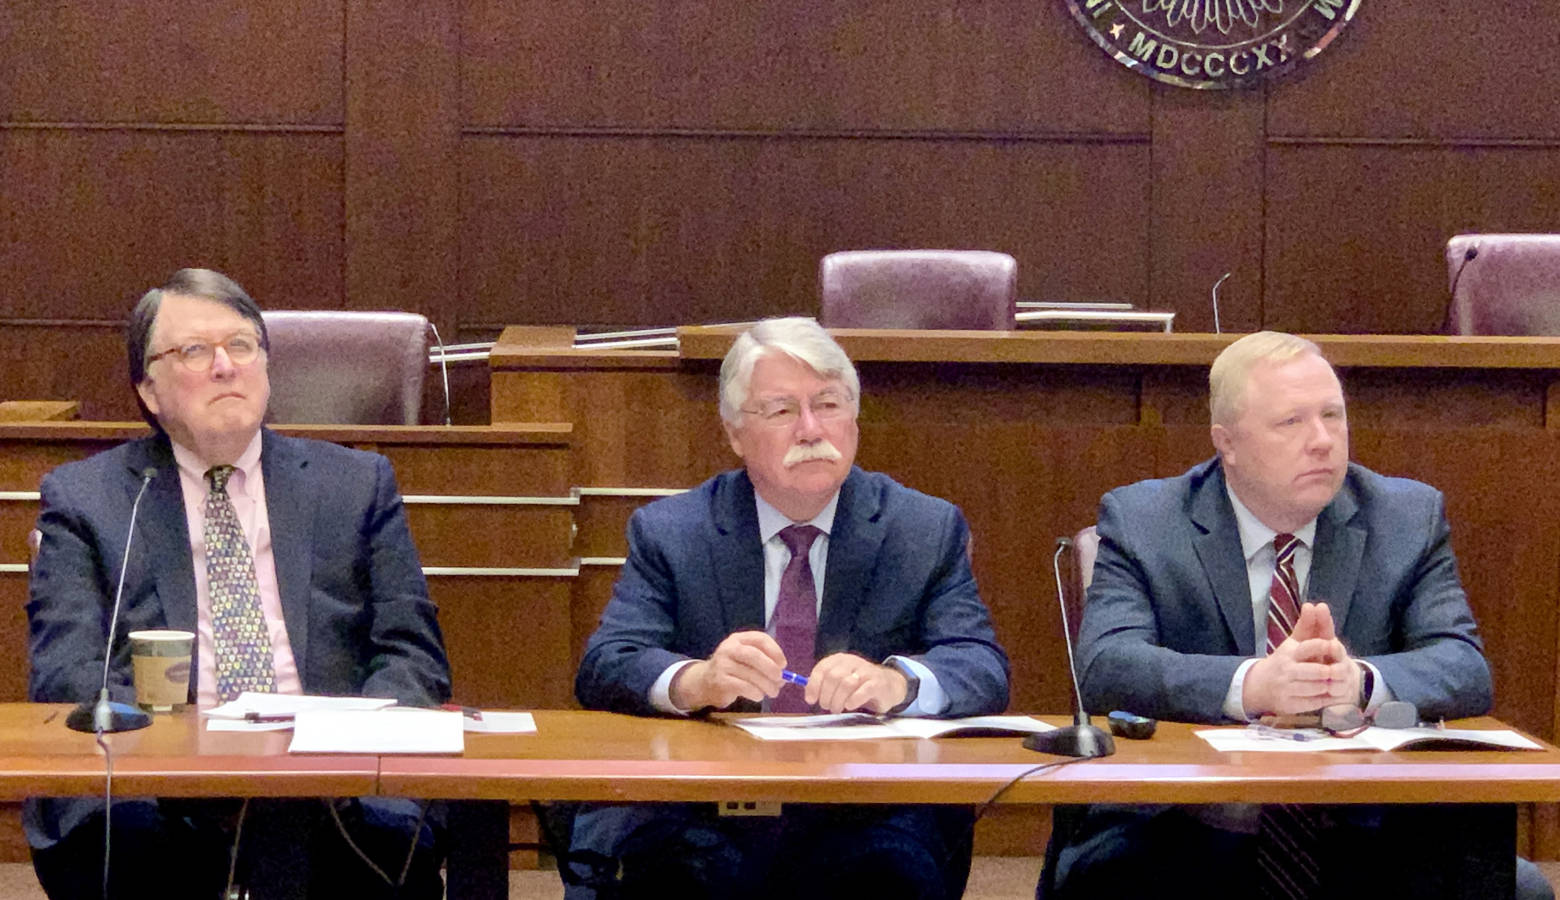 Former Indiana Chief Justice Randall Shepard, former Attorney General Greg Zoeller and Indiana Bar Foundation Executive Director Chuck Dunlap at the unveiling of the 2019 Indiana Civic Health Index. (Brandon Smith/IPB News)